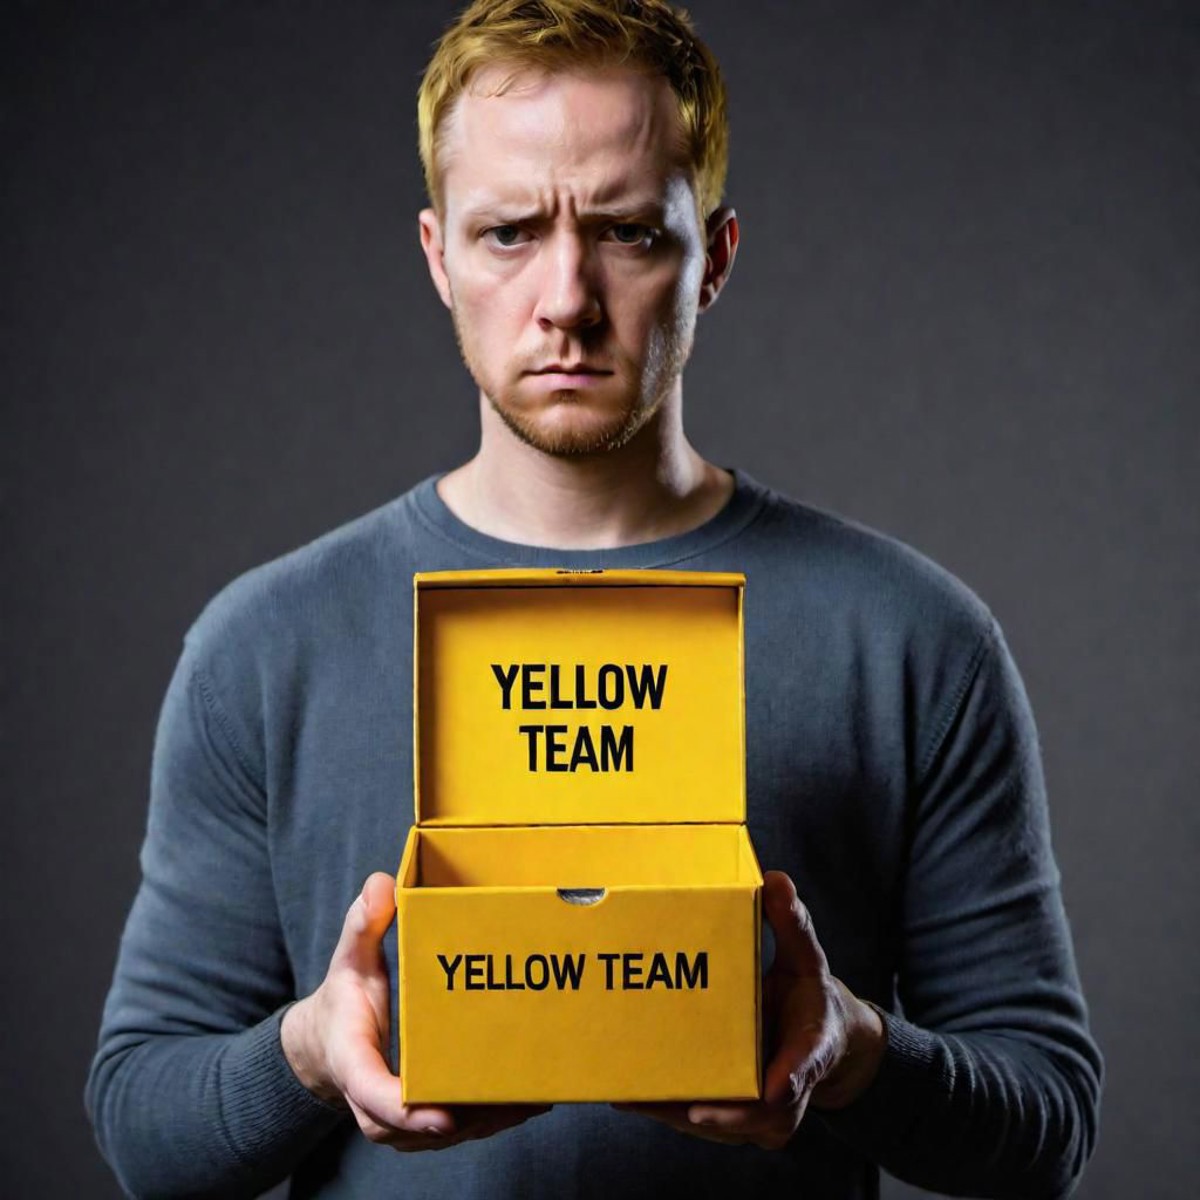 a sad man holding (a tiny box with the text "yellow team") looks incredibly sad and guilty, a single yellow-orange lightni...